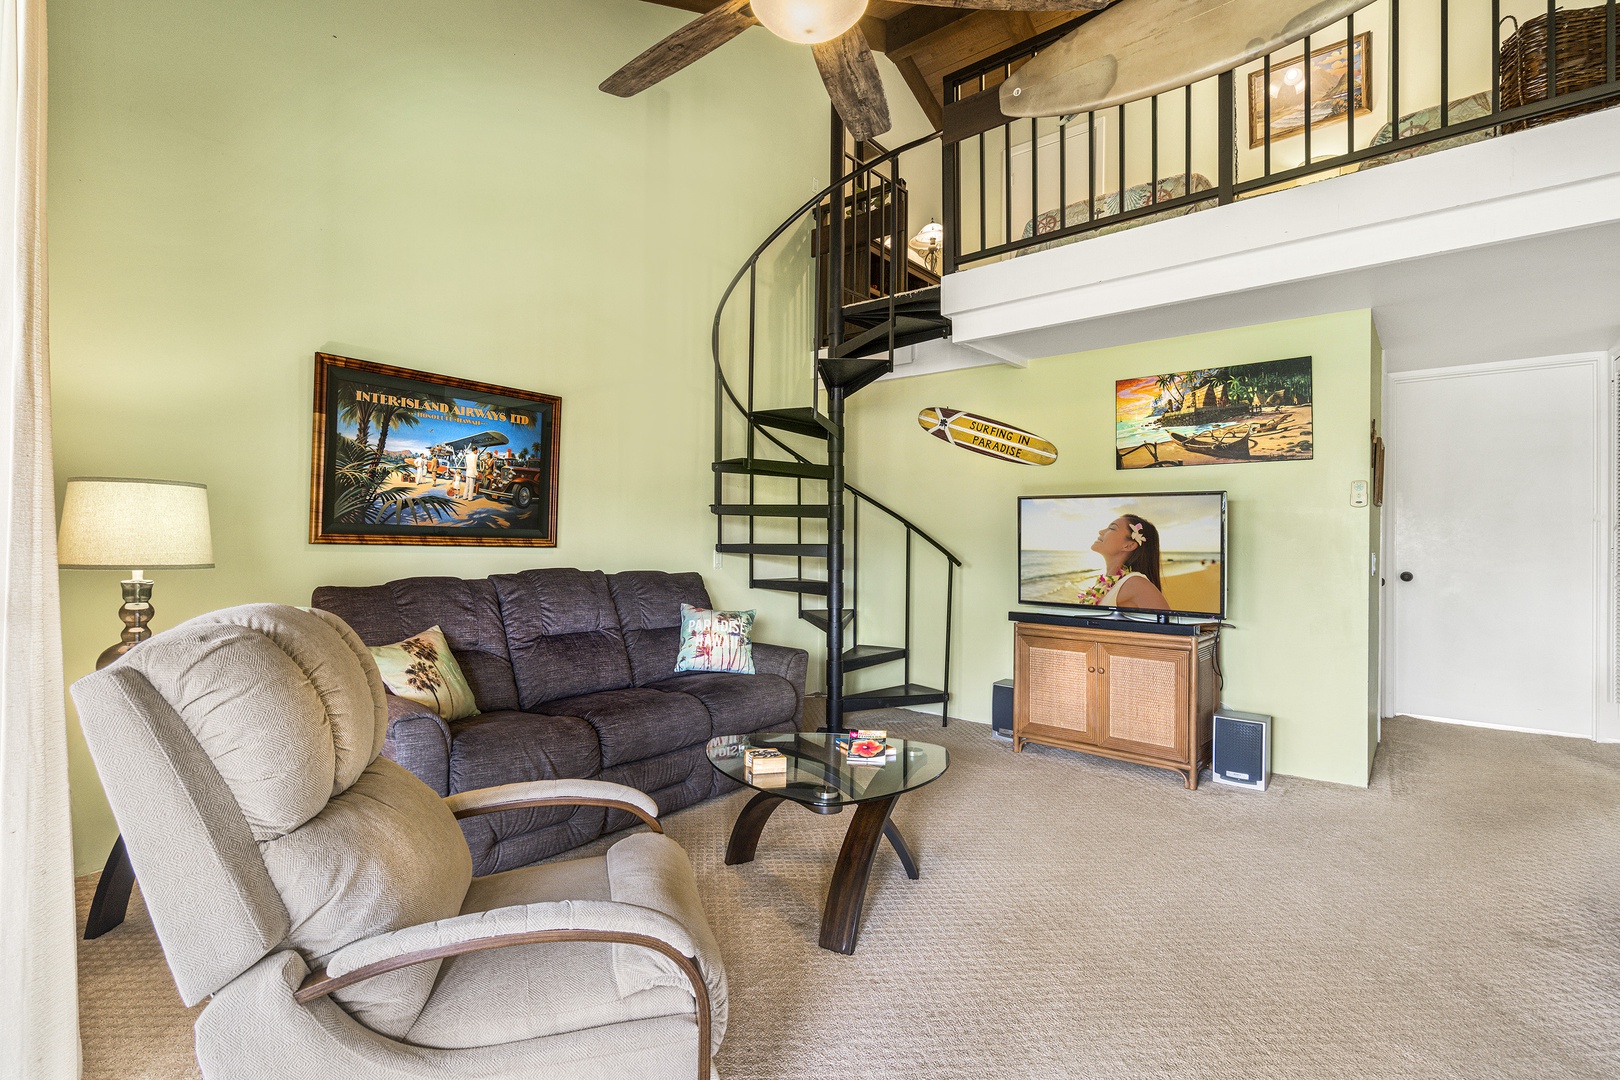 Kailua Kona Vacation Rentals, Kona Makai 2303 - Relax in the recliner and watch your favorite shows